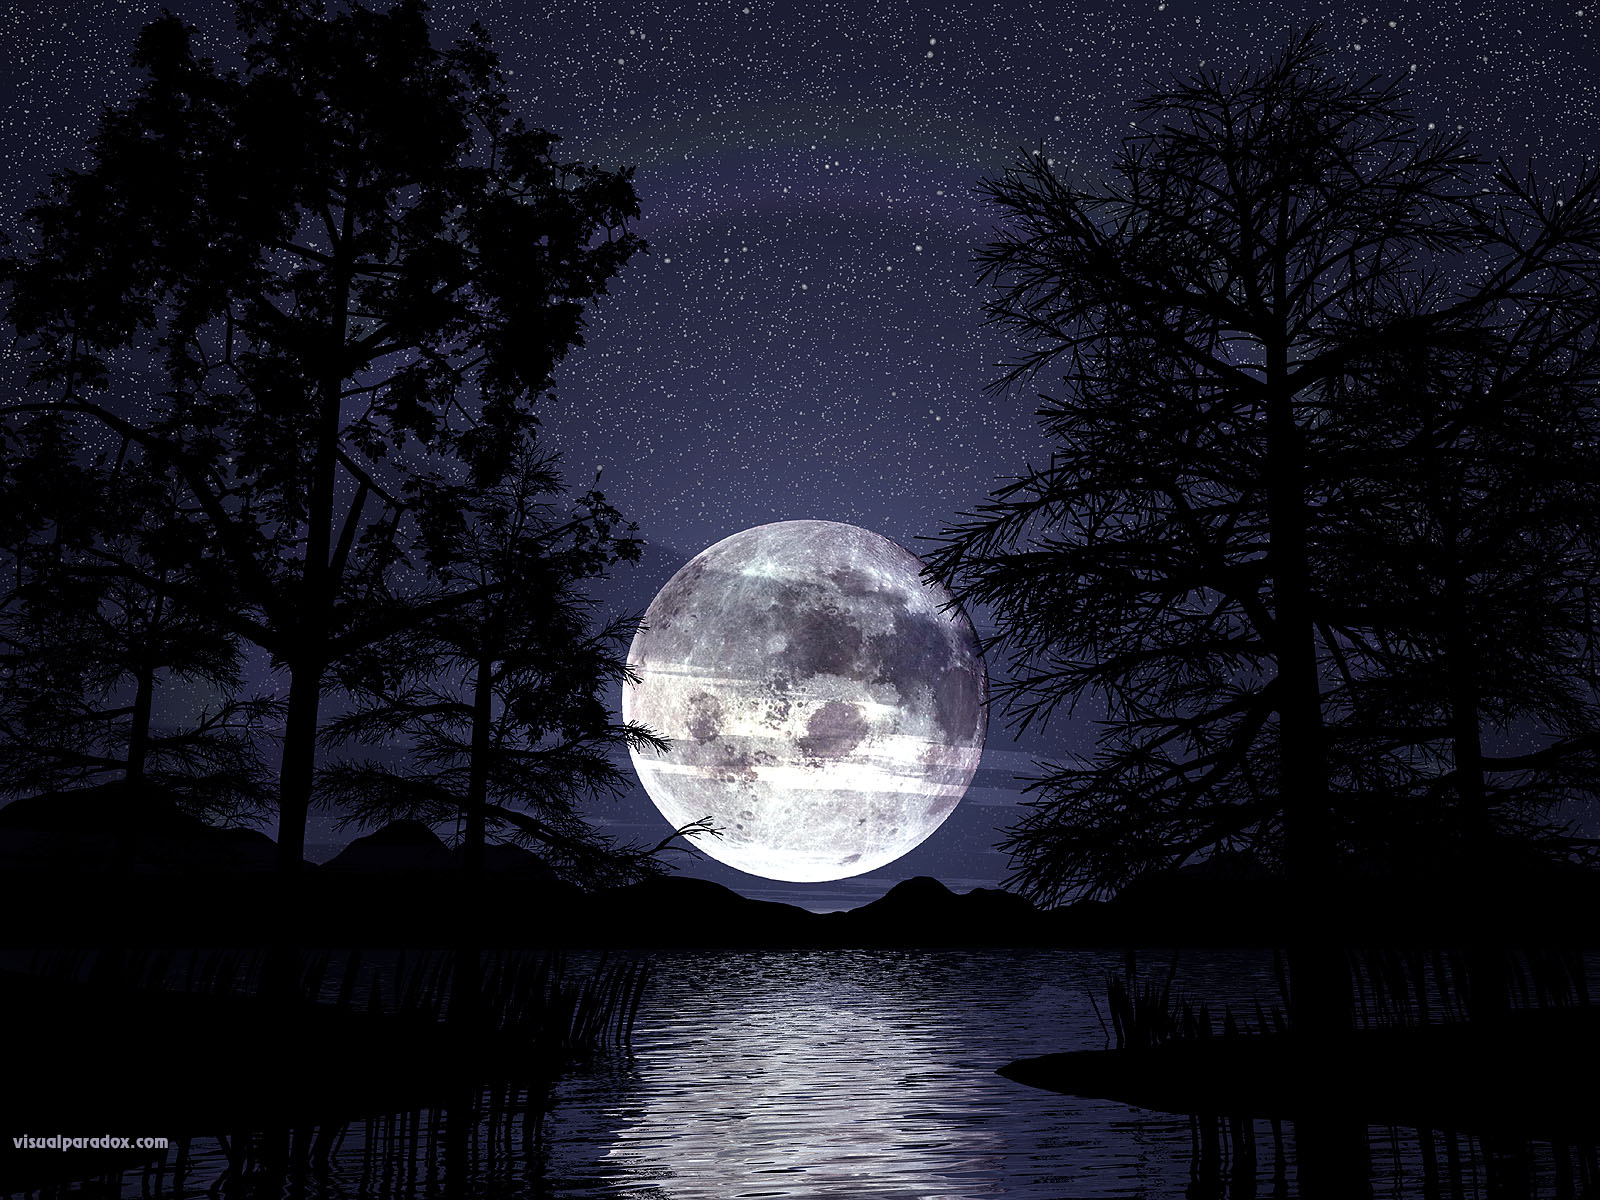 lunar, trees, lake, water, reeds, silhouette, stars, romantic, peaceful, tranquil, reflections, full, 3d, wallpaper